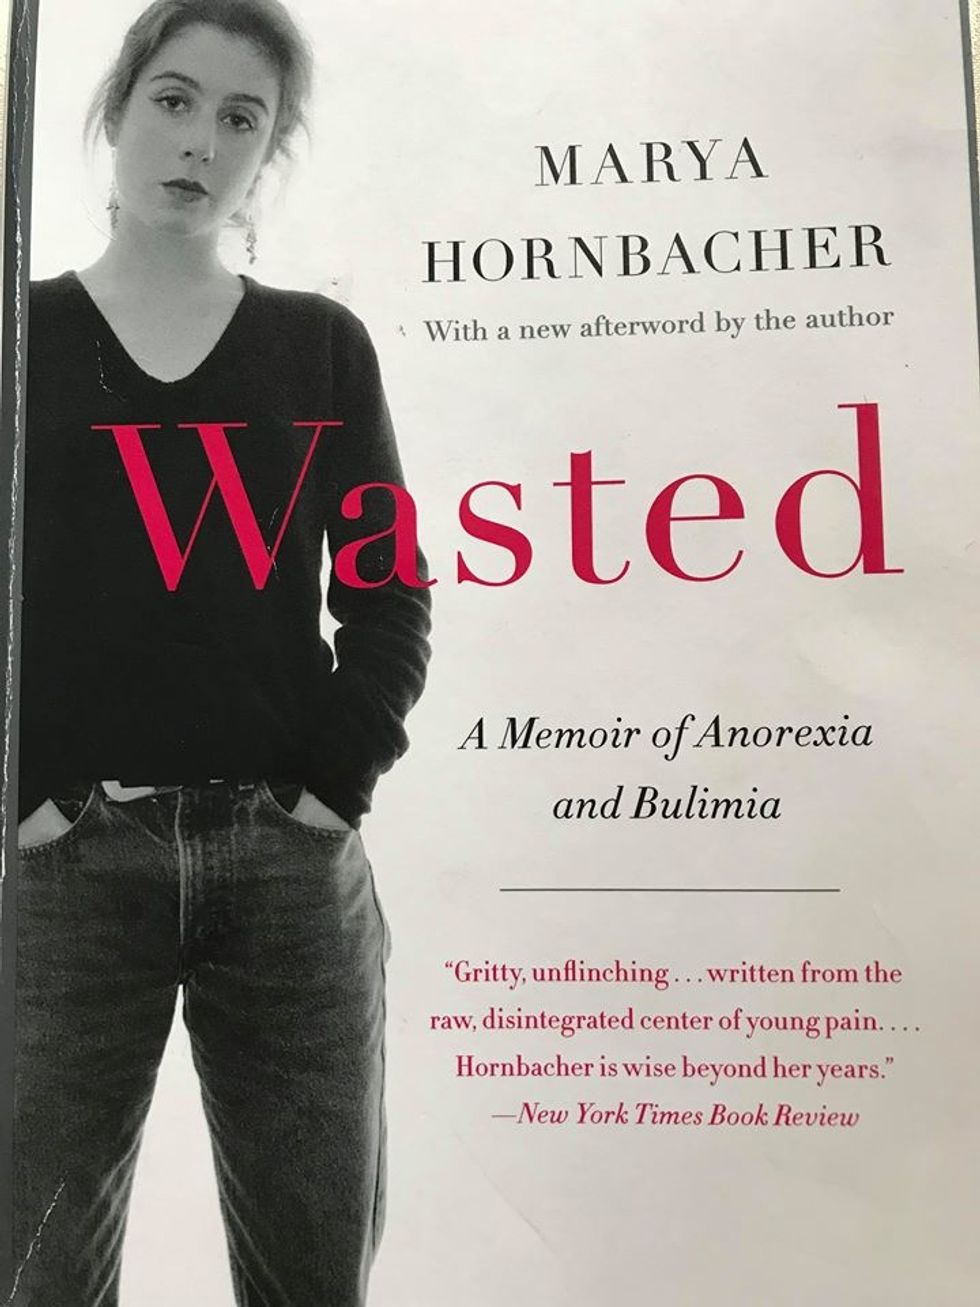 Should I Read Wasted by Maryra Hornbacher?